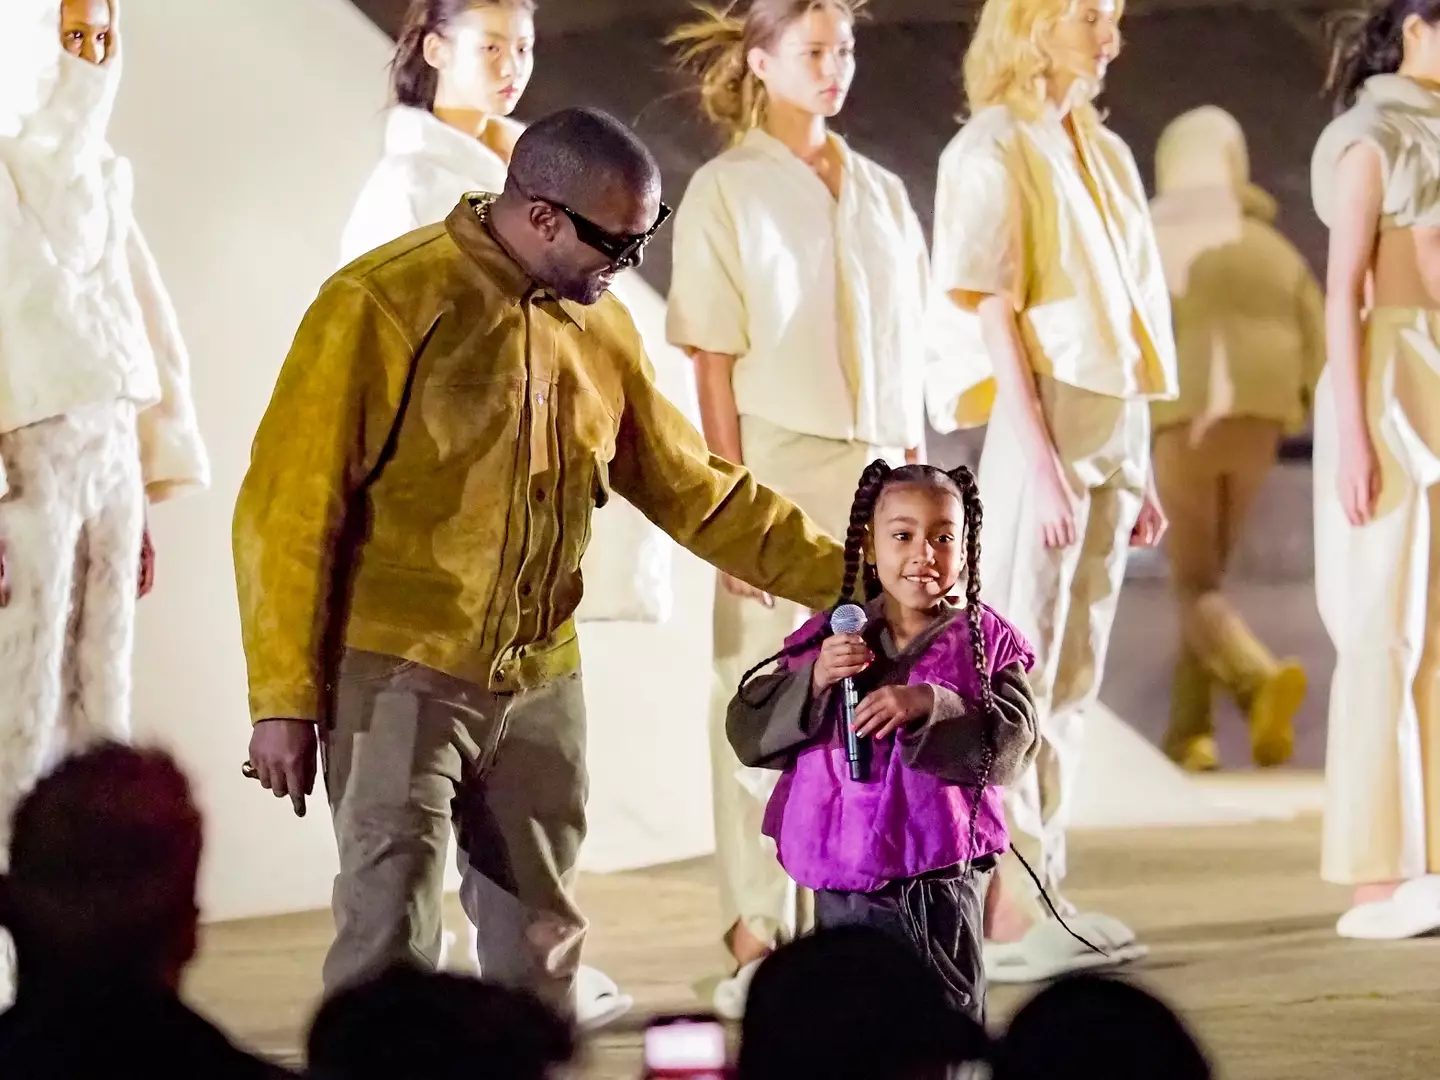 North West appears to be following in Ye's footsteps, making numerous stage appearances over the years.